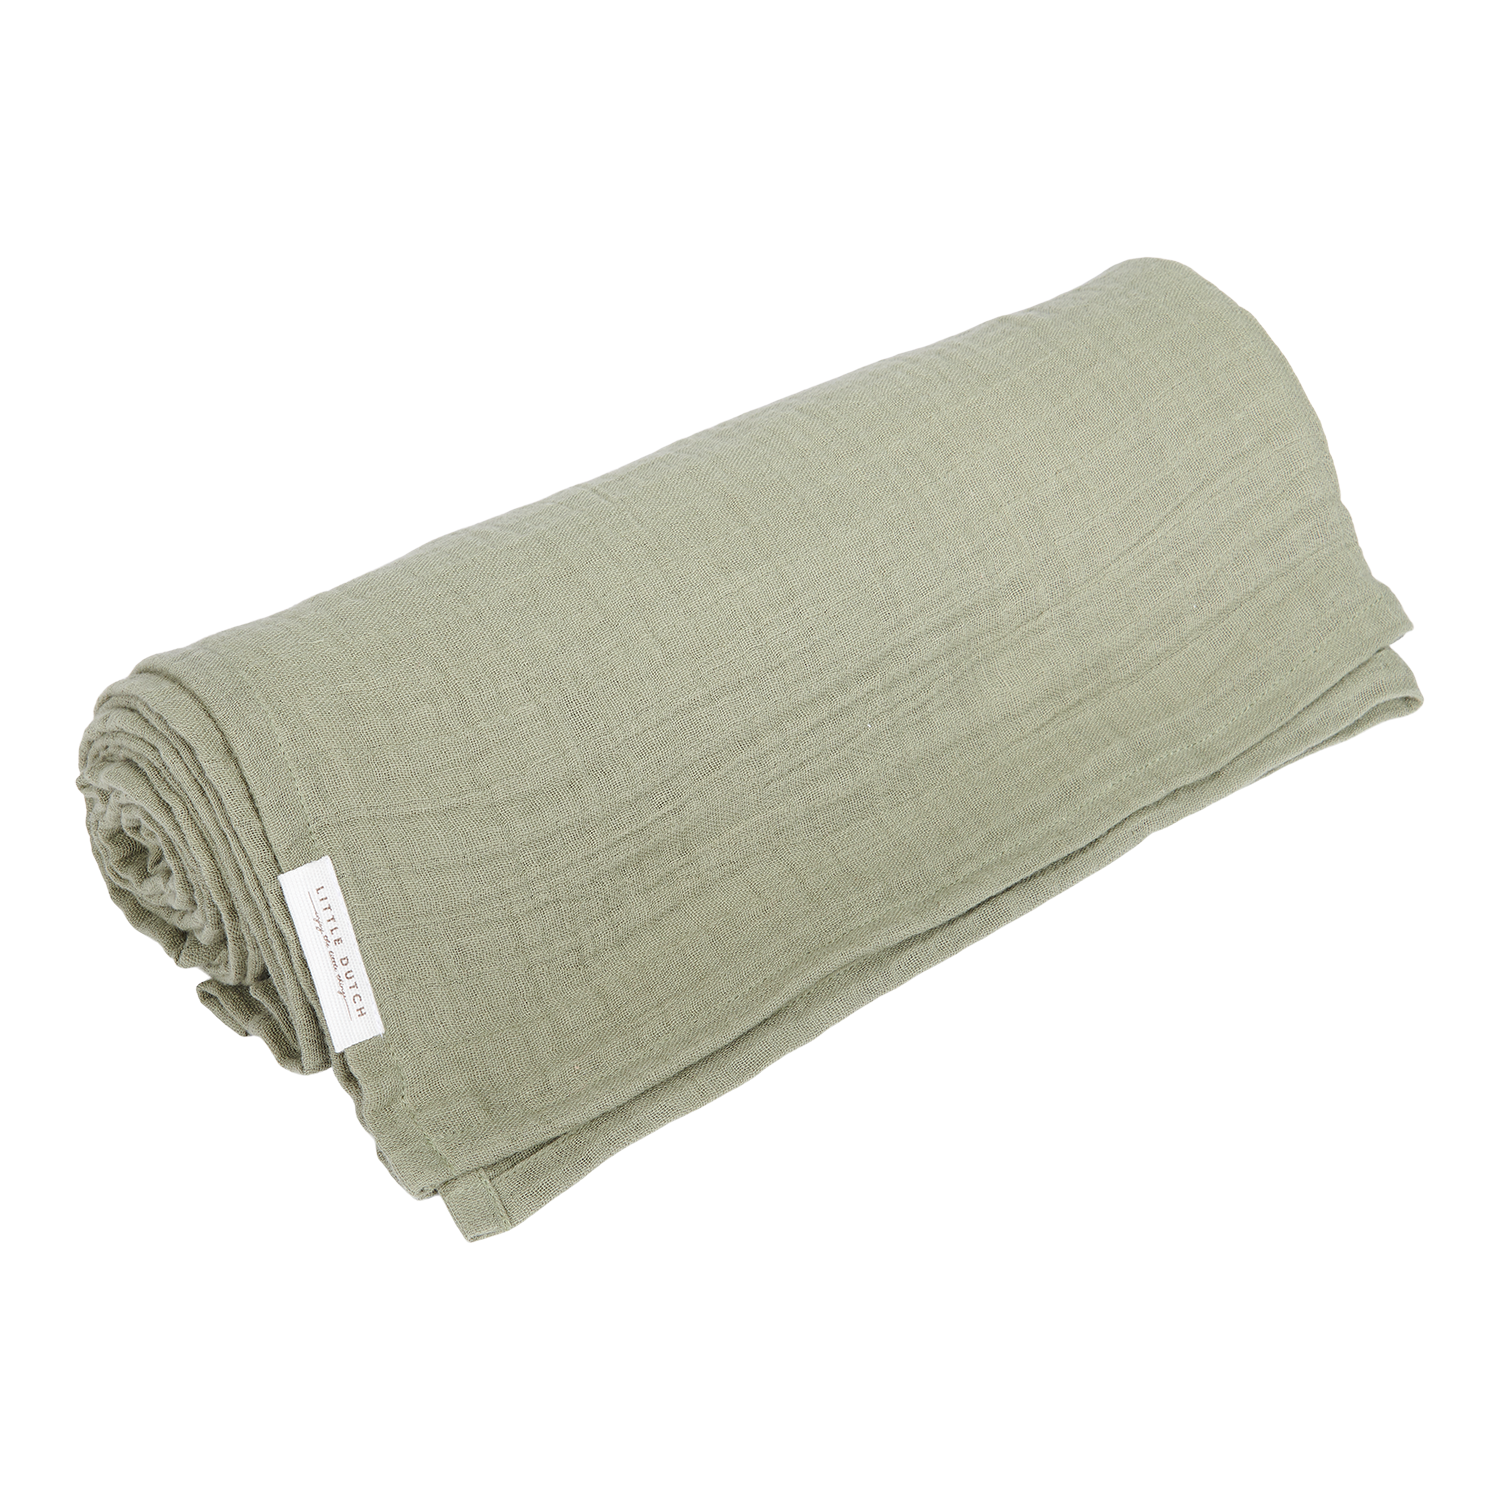 Musselin Swaddle Tuch / Pucktuch Little Farm olive (120x120 cm)